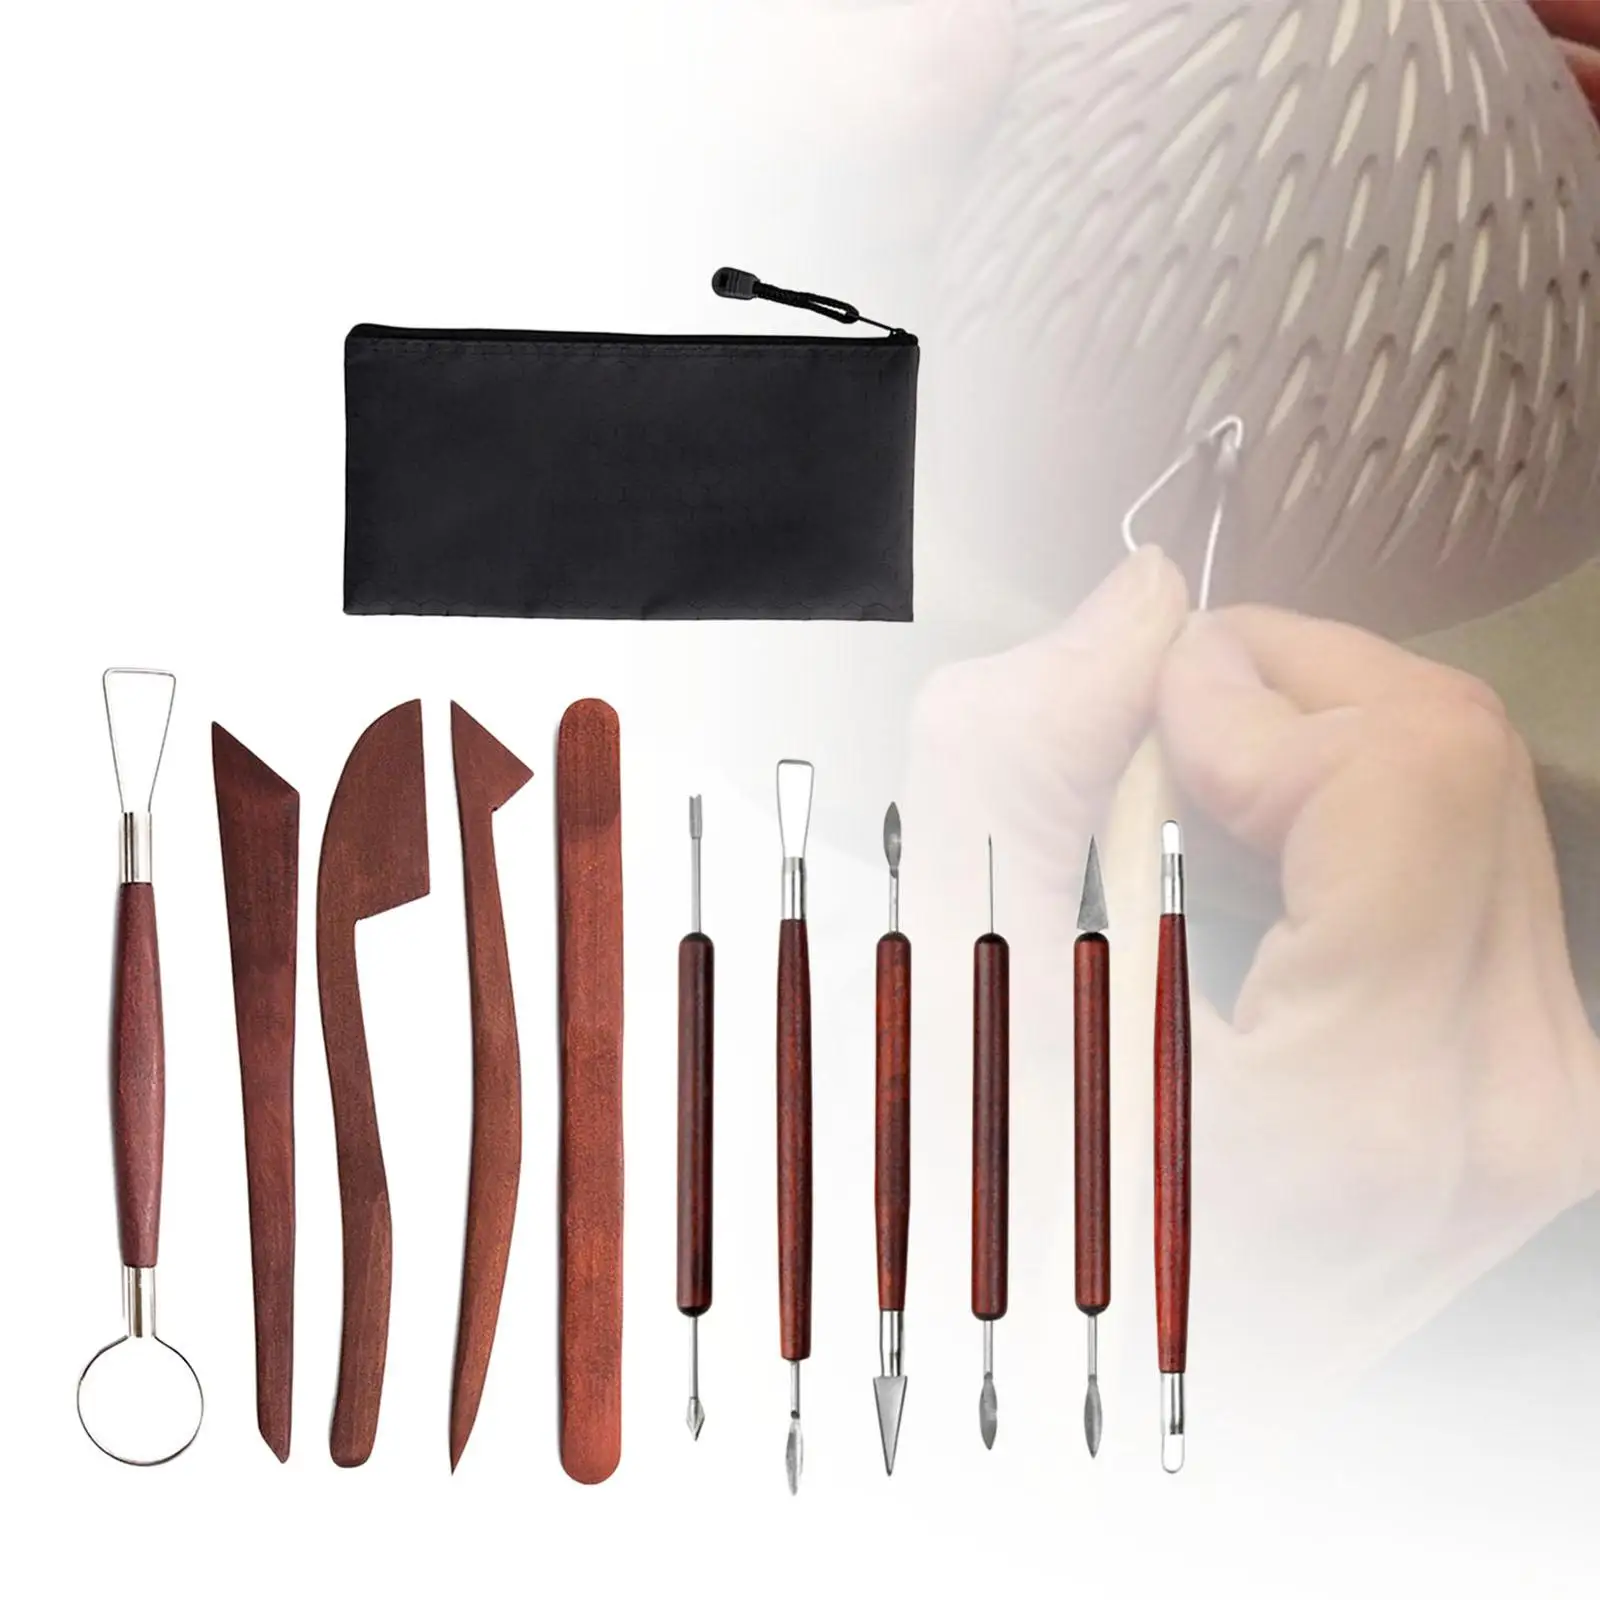 12x Clay Sculpting Tools Smooth Wooden Handle Double Ended Modeling Carrying Bag Pottery Carving Tool Set for Schools and Home